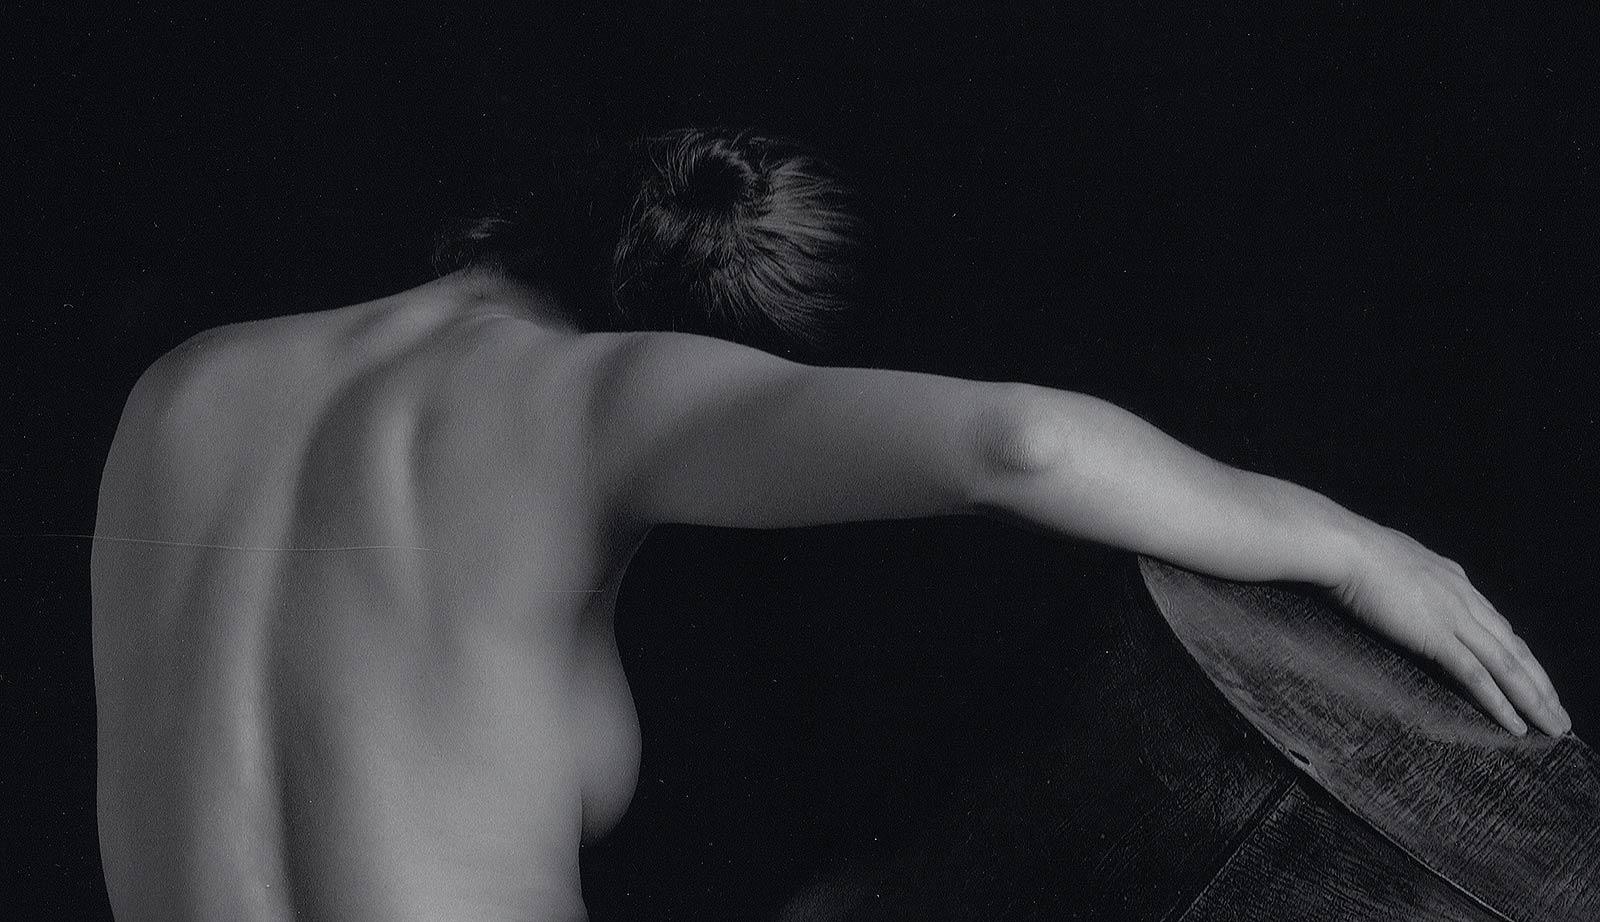 Nude with Zinc Vessel (The back view of a nude woman holding a zinc object) - Photograph by Eric Kellerman (b. 1944)